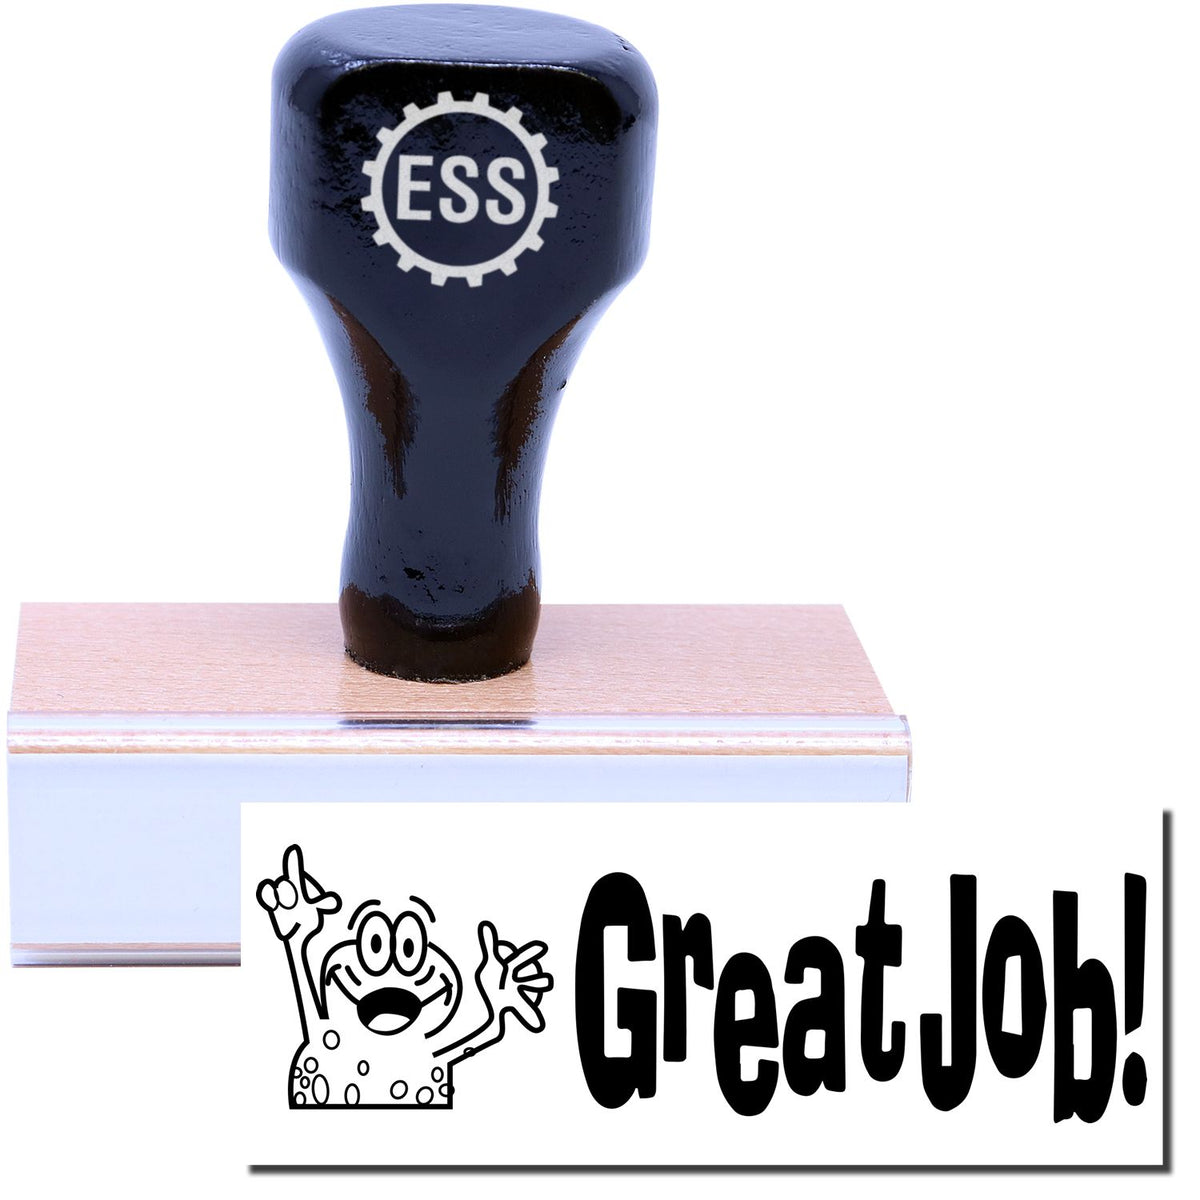 A stock office rubber stamp with a stamped image showing how the text &quot;Great Job!&quot; with an adorable frog with its hand up in the air is displayed after stamping.